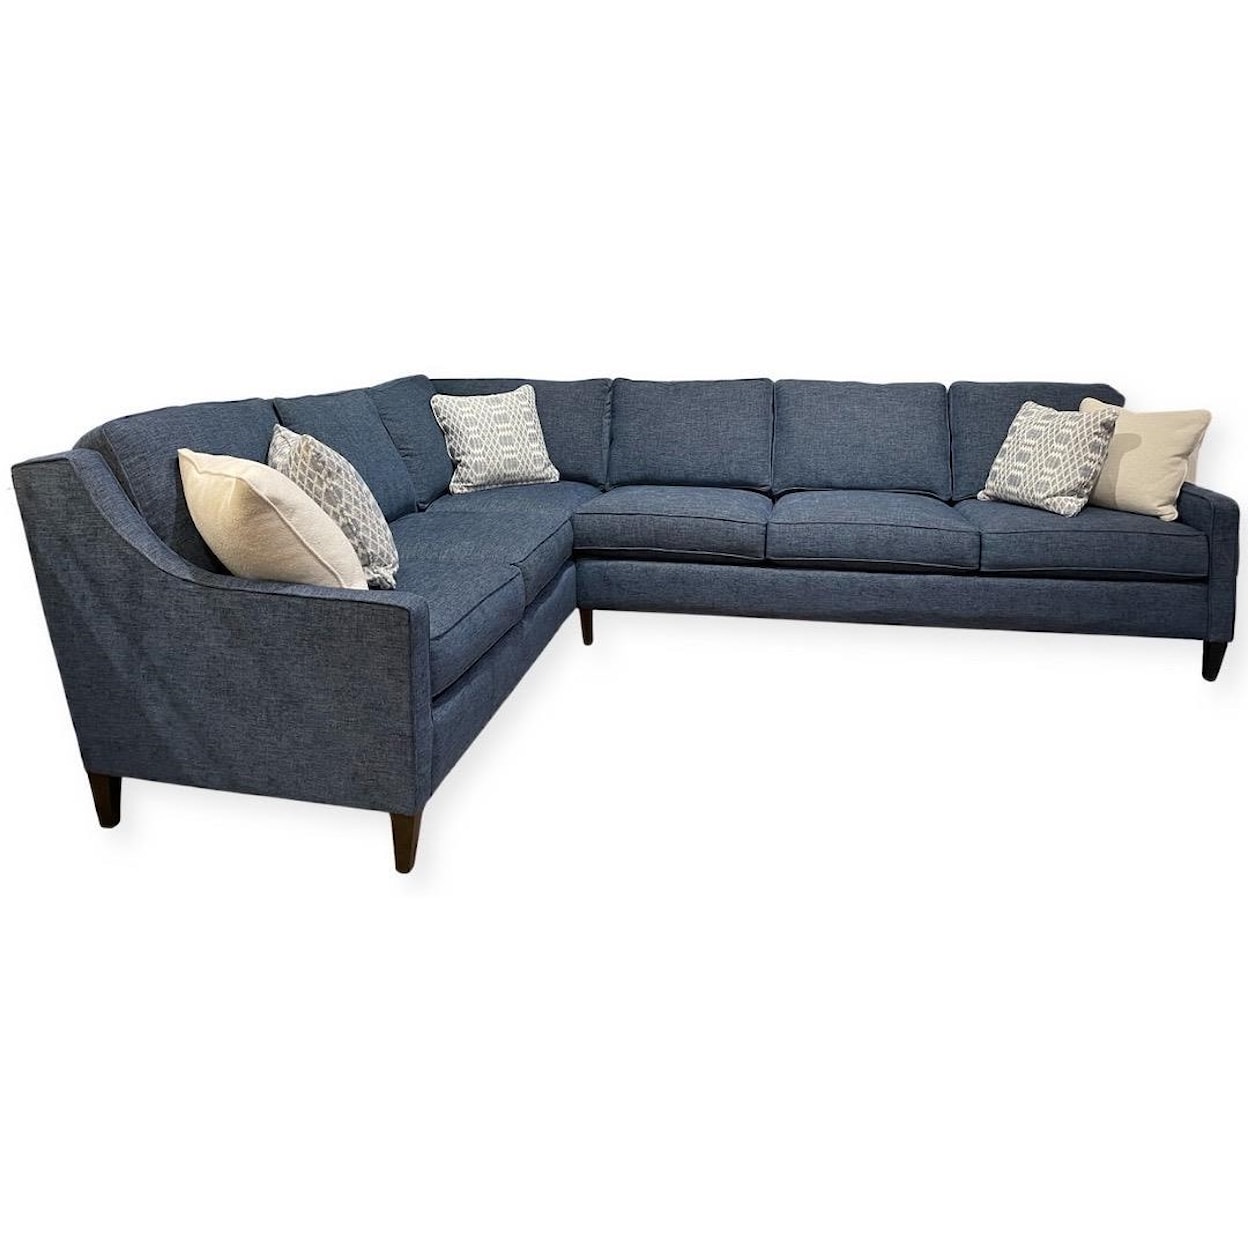 Rowe My Style Studio 2pc Sectional